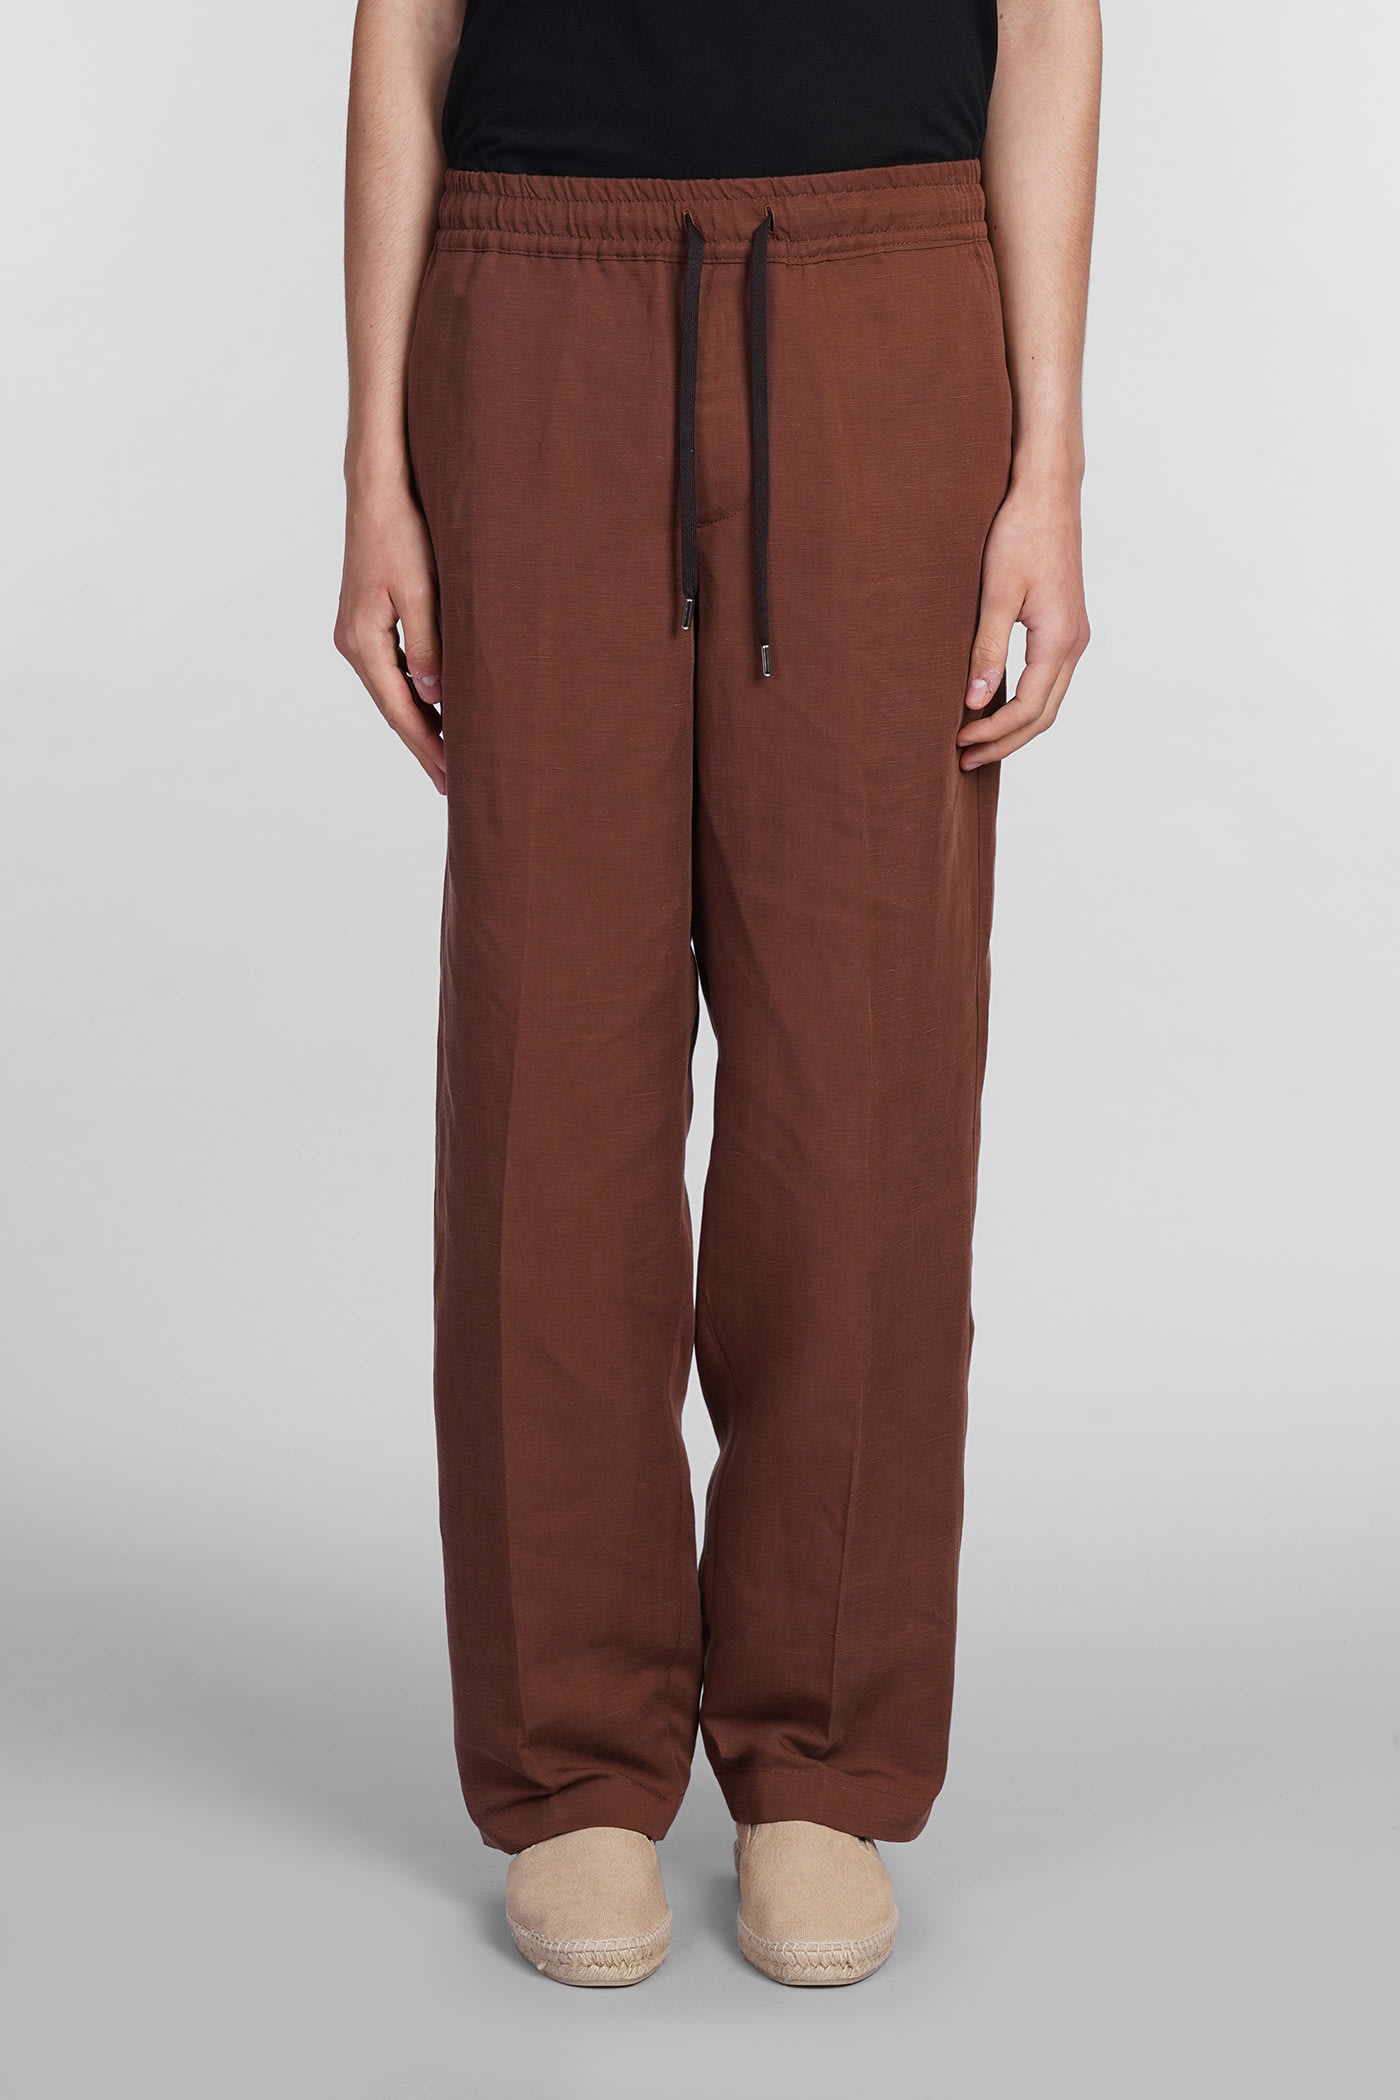 Pajama Pants In Brown Cly